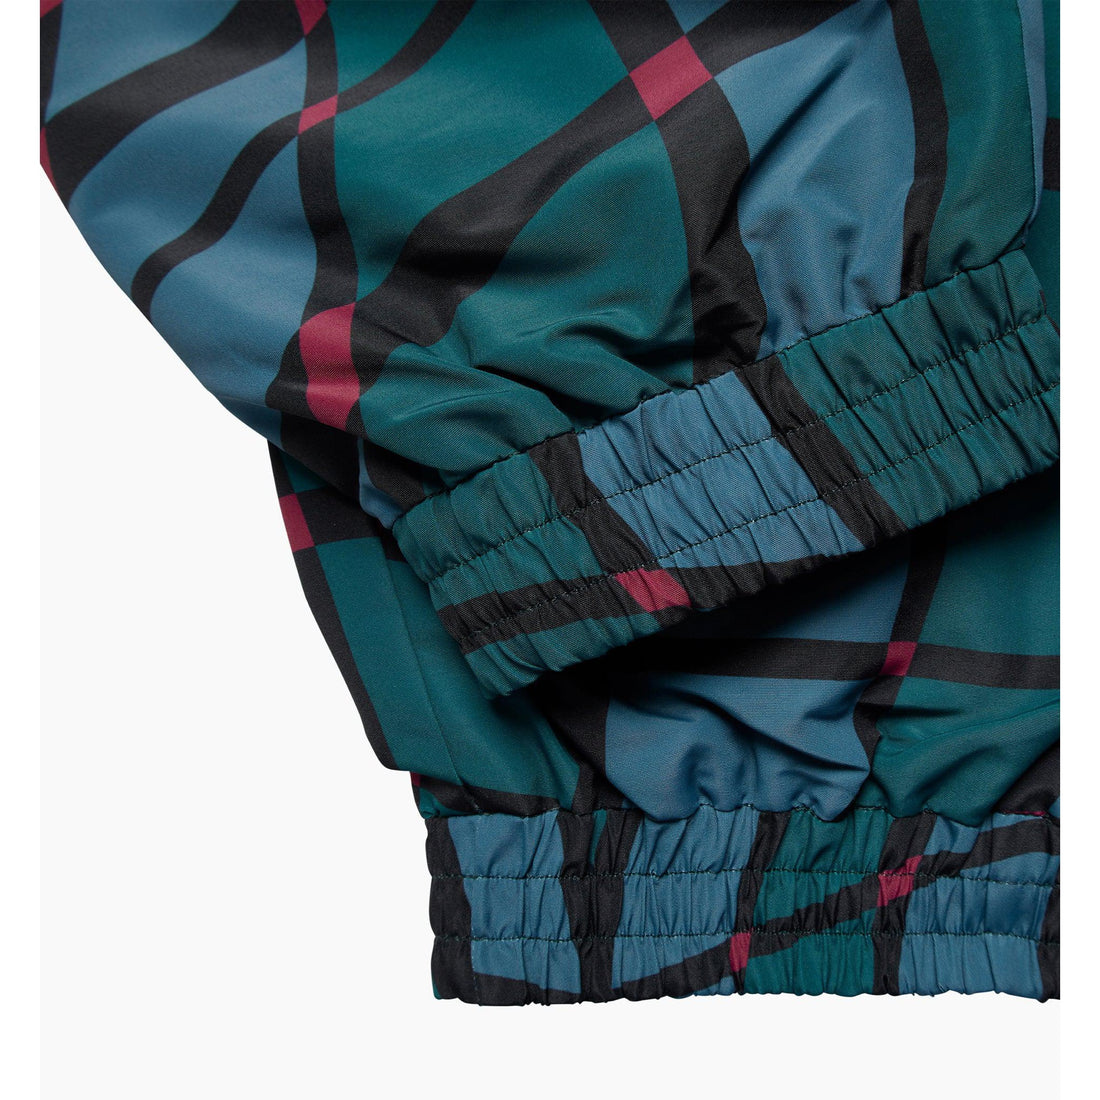 BY PARRA - SQUARED WAVES PATTERN TRACK PANTS - MULTI